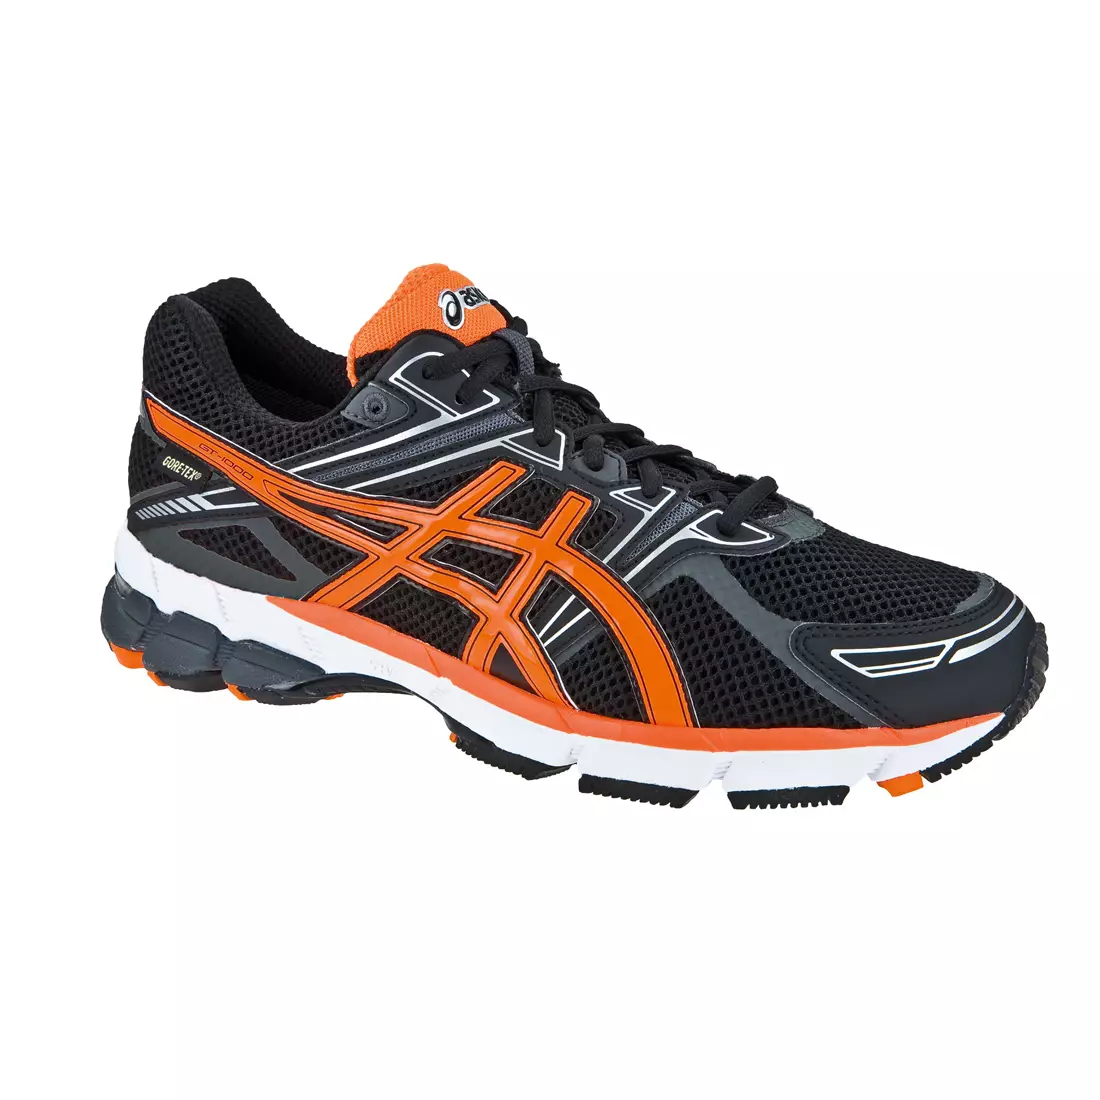 ASICS GT-1000 G-TX - 9030 running shoes, color: Black and orange